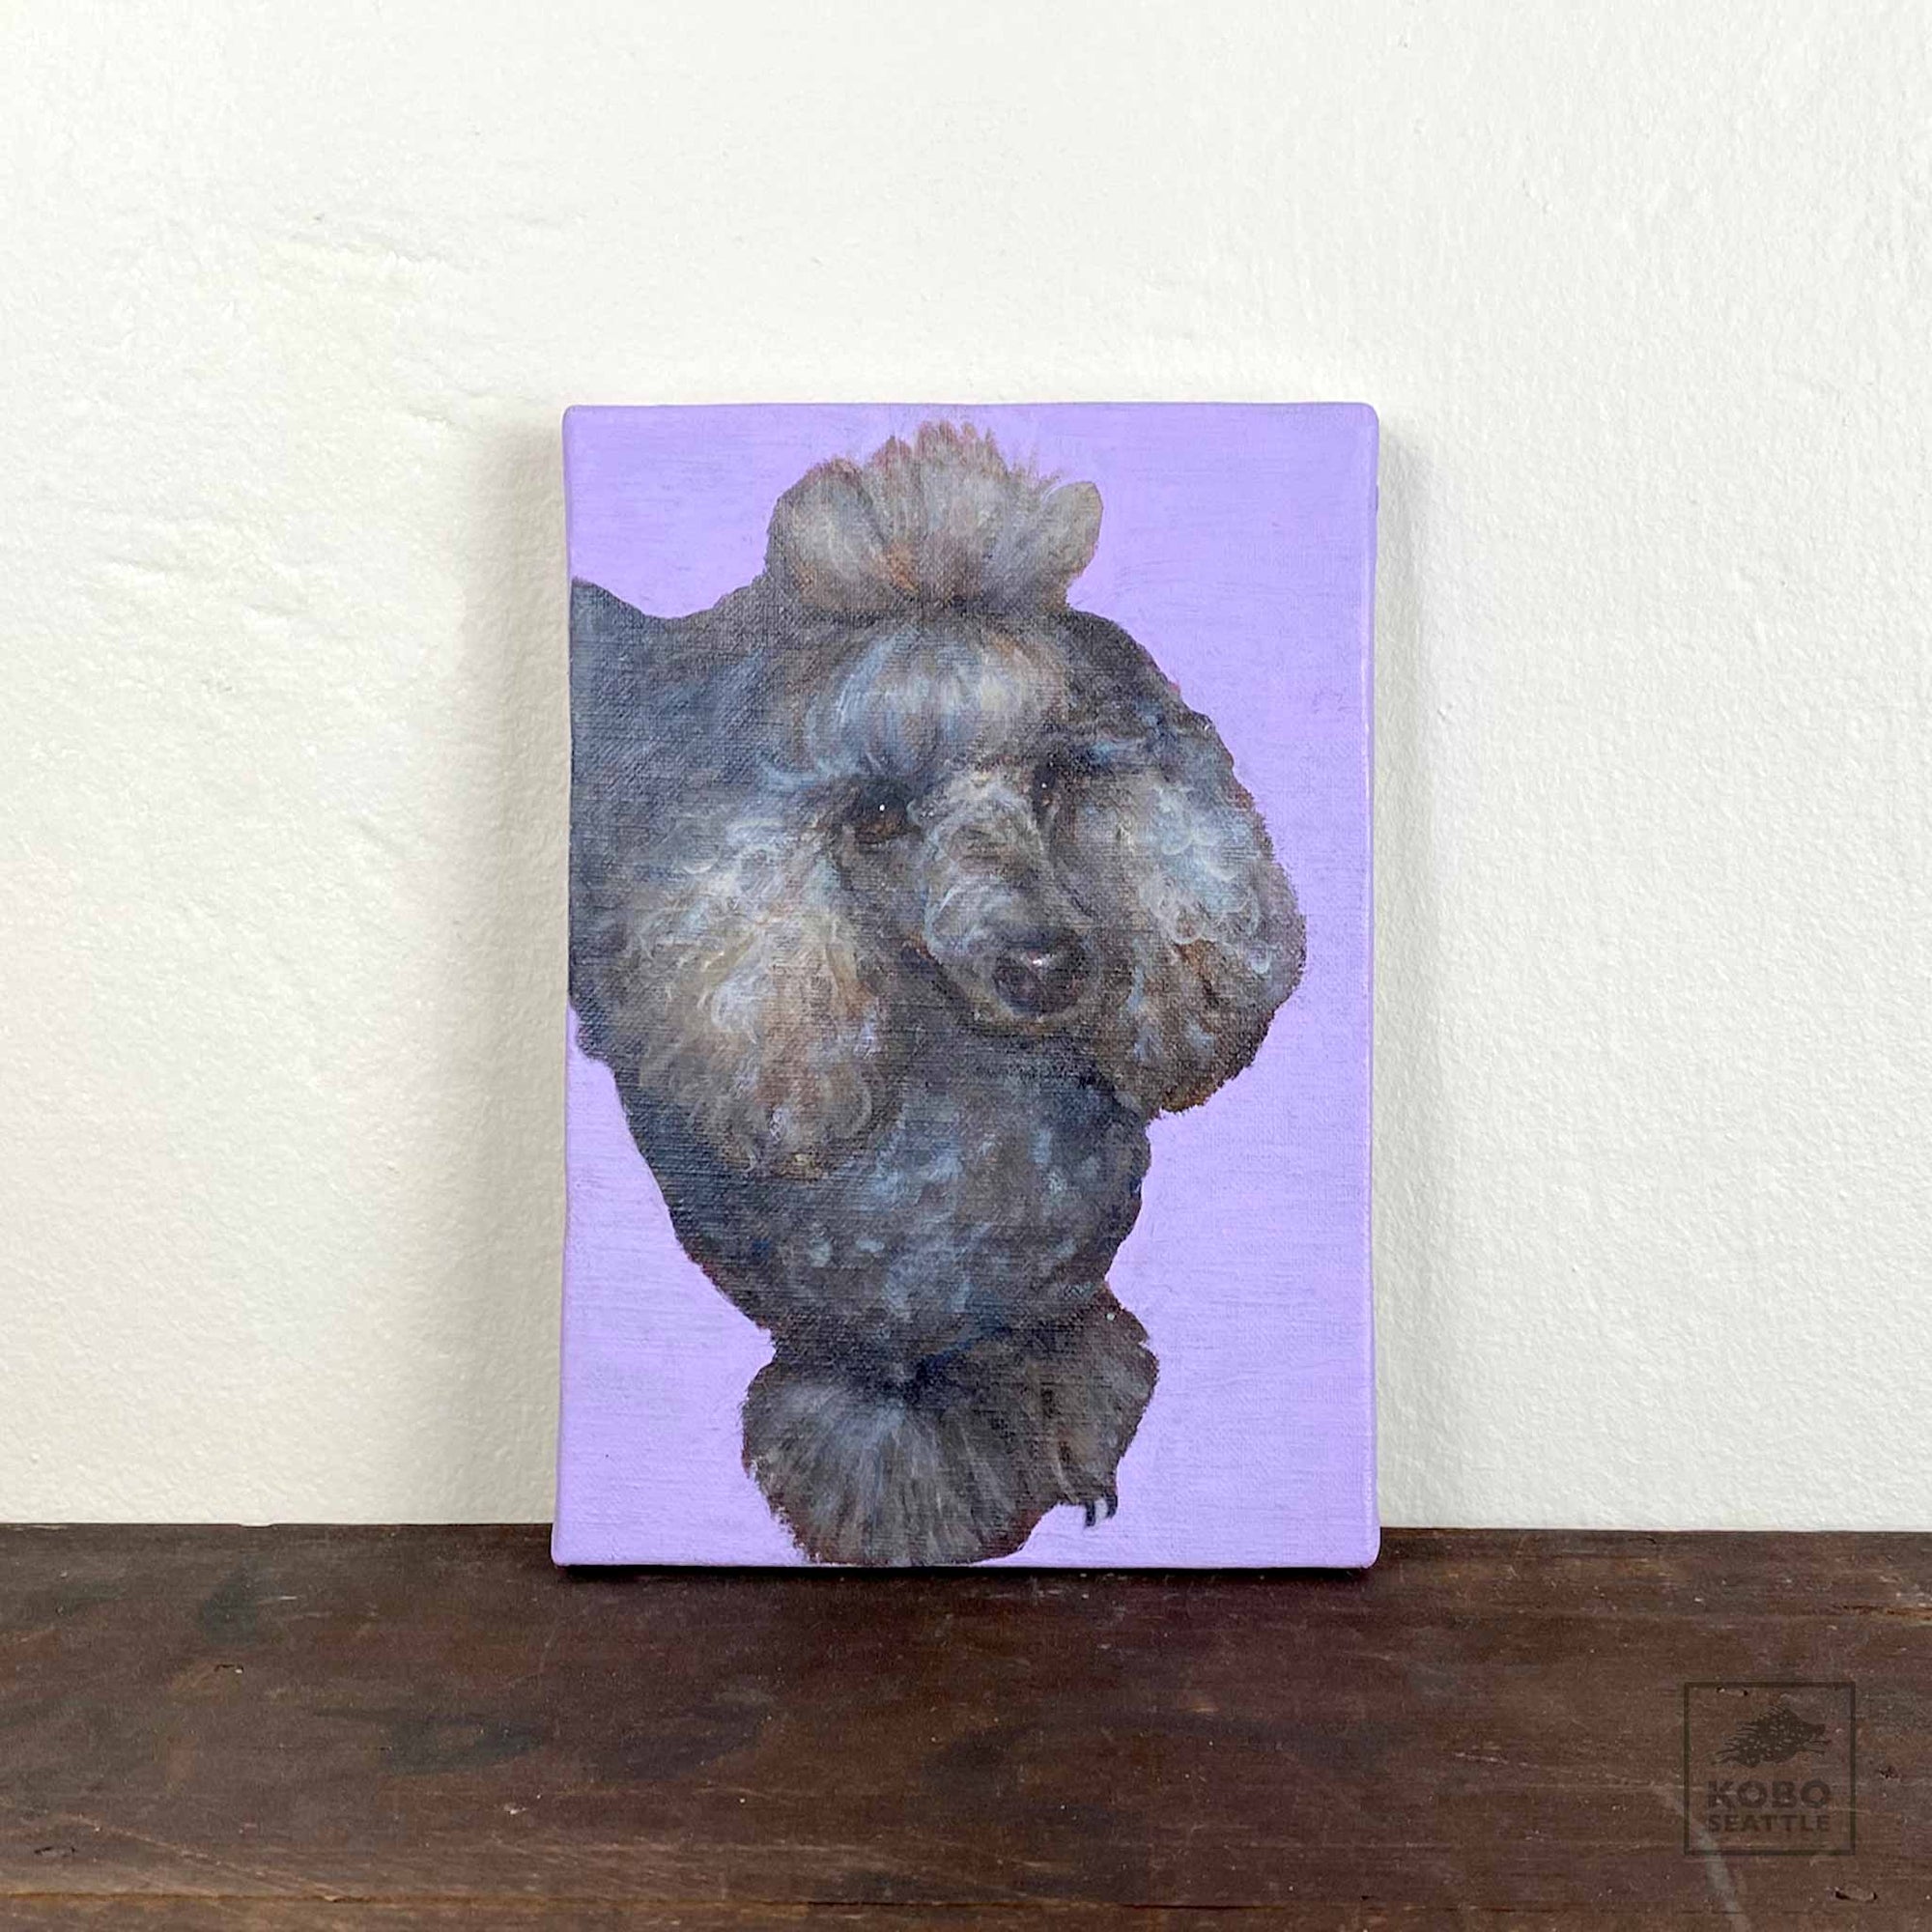 Oil on canvas from Chinami Kono - Poodle